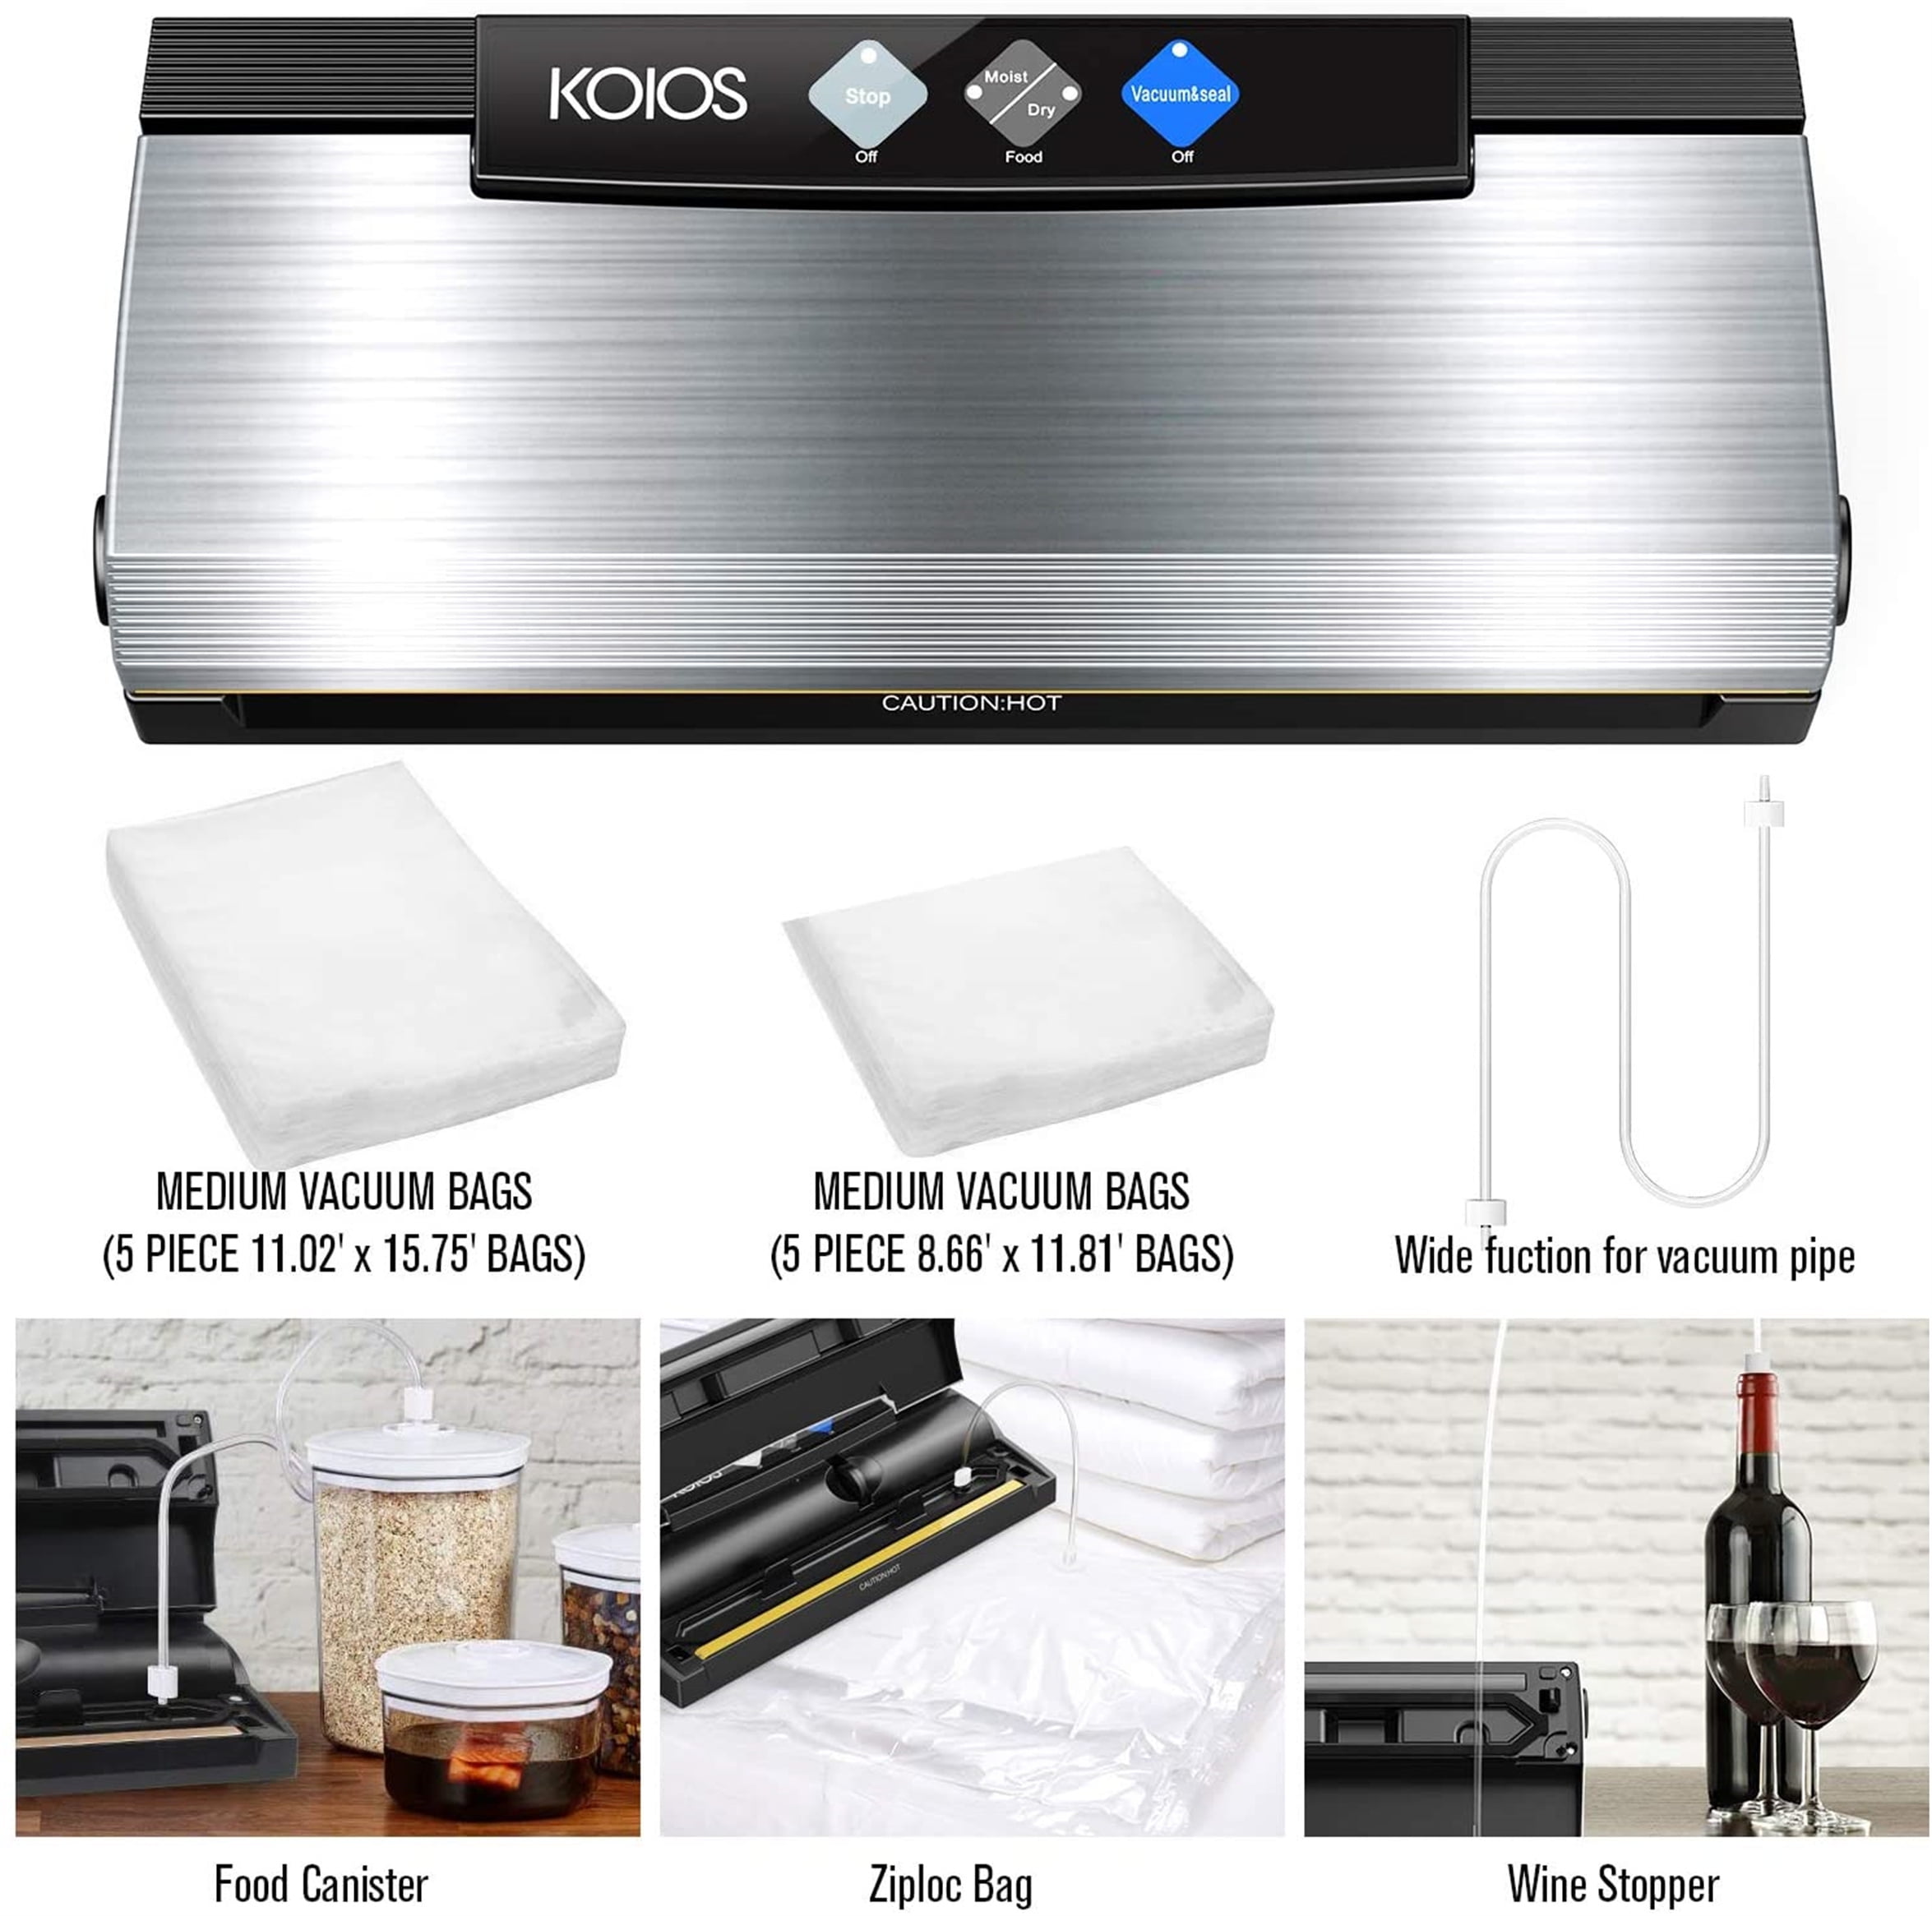 Vacuum Sealer Machine, Full Automatic Food Vacuum Sealer Machine (80KPA), 5  in 1 Arcmira Compact Vacuum Sealer with 10 Sealer Bags, Built-in Cutter